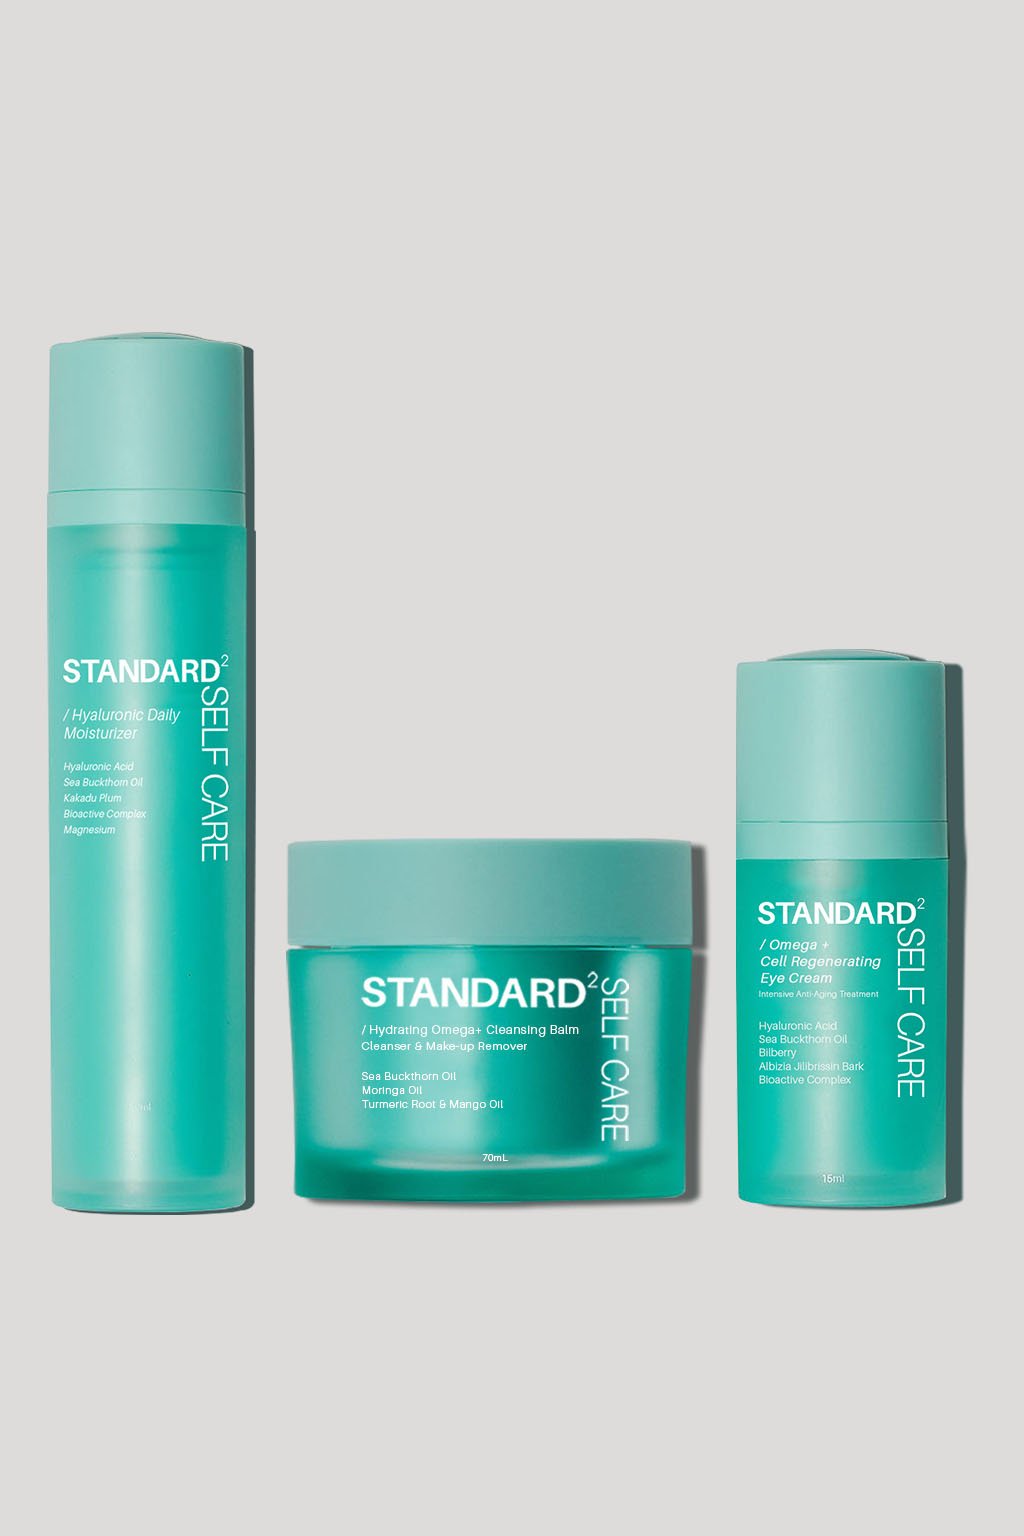 Discover Standard Self Care: The Cleanest and Most Effective Cosmeceutical Skincare - Standard Self Care